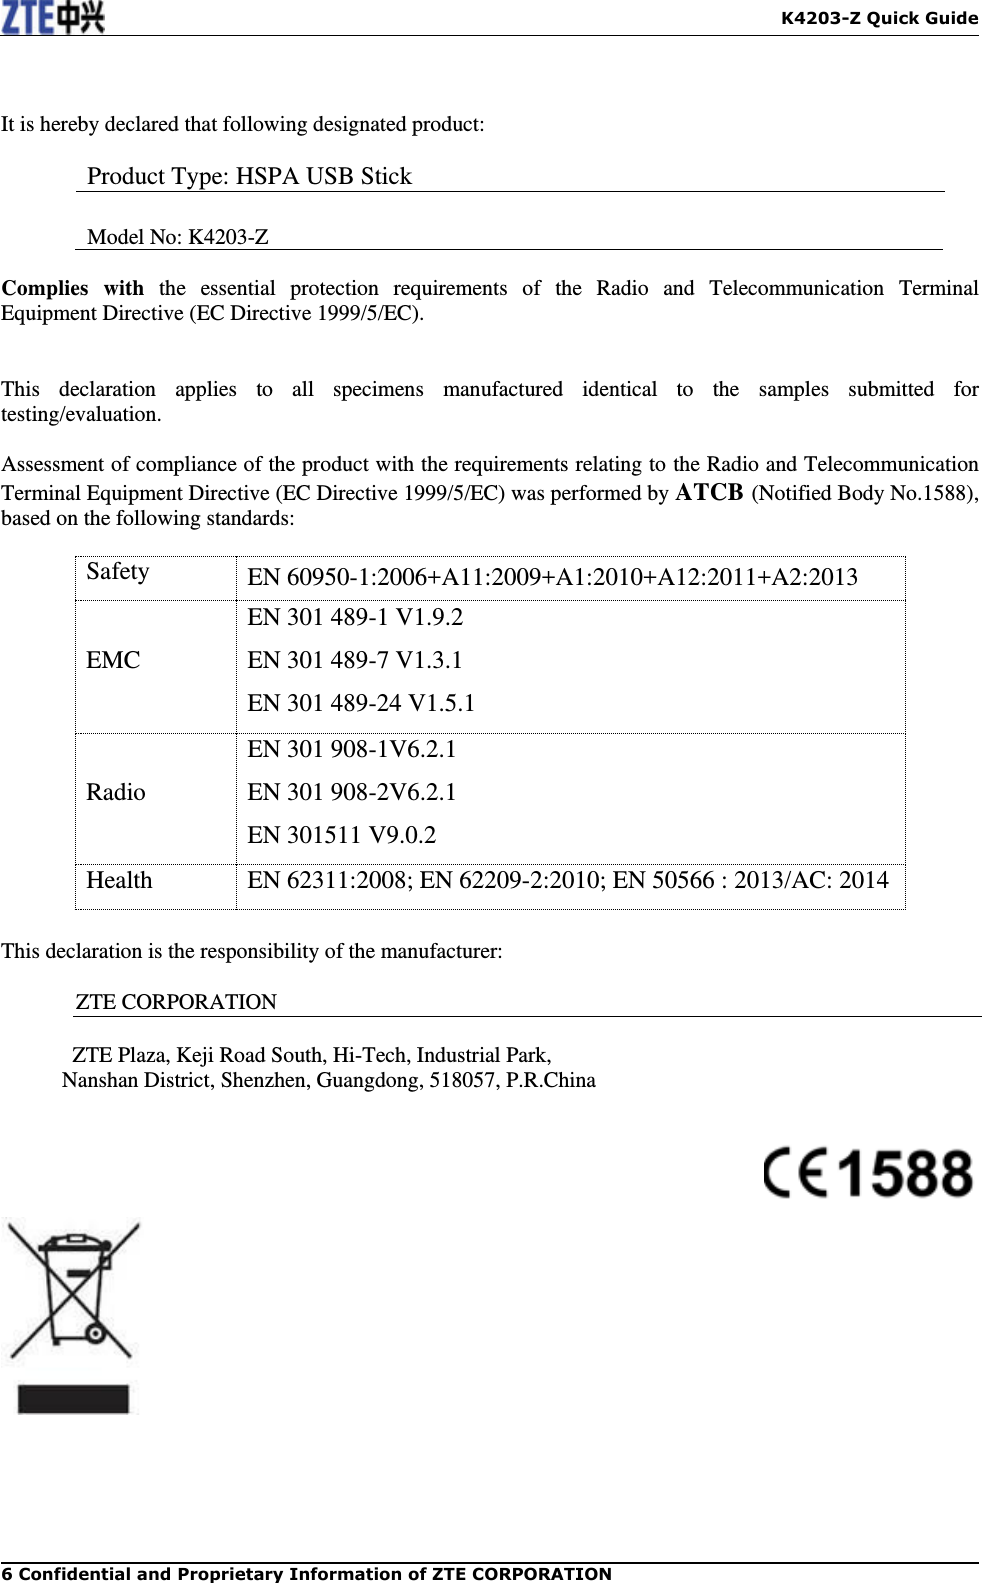   K4203-Z Quick Guide 6 Confidential and Proprietary Information of ZTE CORPORATION  It is hereby declared that following designated product:  Product Type: HSPA USB Stick  Model No: K4203-Z  Complies  with  the  essential  protection  requirements  of  the  Radio  and  Telecommunication  Terminal     Equipment Directive (EC Directive 1999/5/EC).   This  declaration  applies  to  all  specimens  manufactured  identical  to  the  samples  submitted  for testing/evaluation.  Assessment of compliance of the product with the requirements relating to the Radio and Telecommunication Terminal Equipment Directive (EC Directive 1999/5/EC) was performed by ATCB (Notified Body No.1588), based on the following standards:  Safety EN 60950-1:2006+A11:2009+A1:2010+A12:2011+A2:2013 EMC EN 301 489-1 V1.9.2 EN 301 489-7 V1.3.1 EN 301 489-24 V1.5.1 Radio EN 301 908-1V6.2.1 EN 301 908-2V6.2.1 EN 301511 V9.0.2 Health EN 62311:2008; EN 62209-2:2010; EN 50566 : 2013/AC: 2014  This declaration is the responsibility of the manufacturer:    ZTE CORPORATION    ZTE Plaza, Keji Road South, Hi-Tech, Industrial Park, Nanshan District, Shenzhen, Guangdong, 518057, P.R.China      